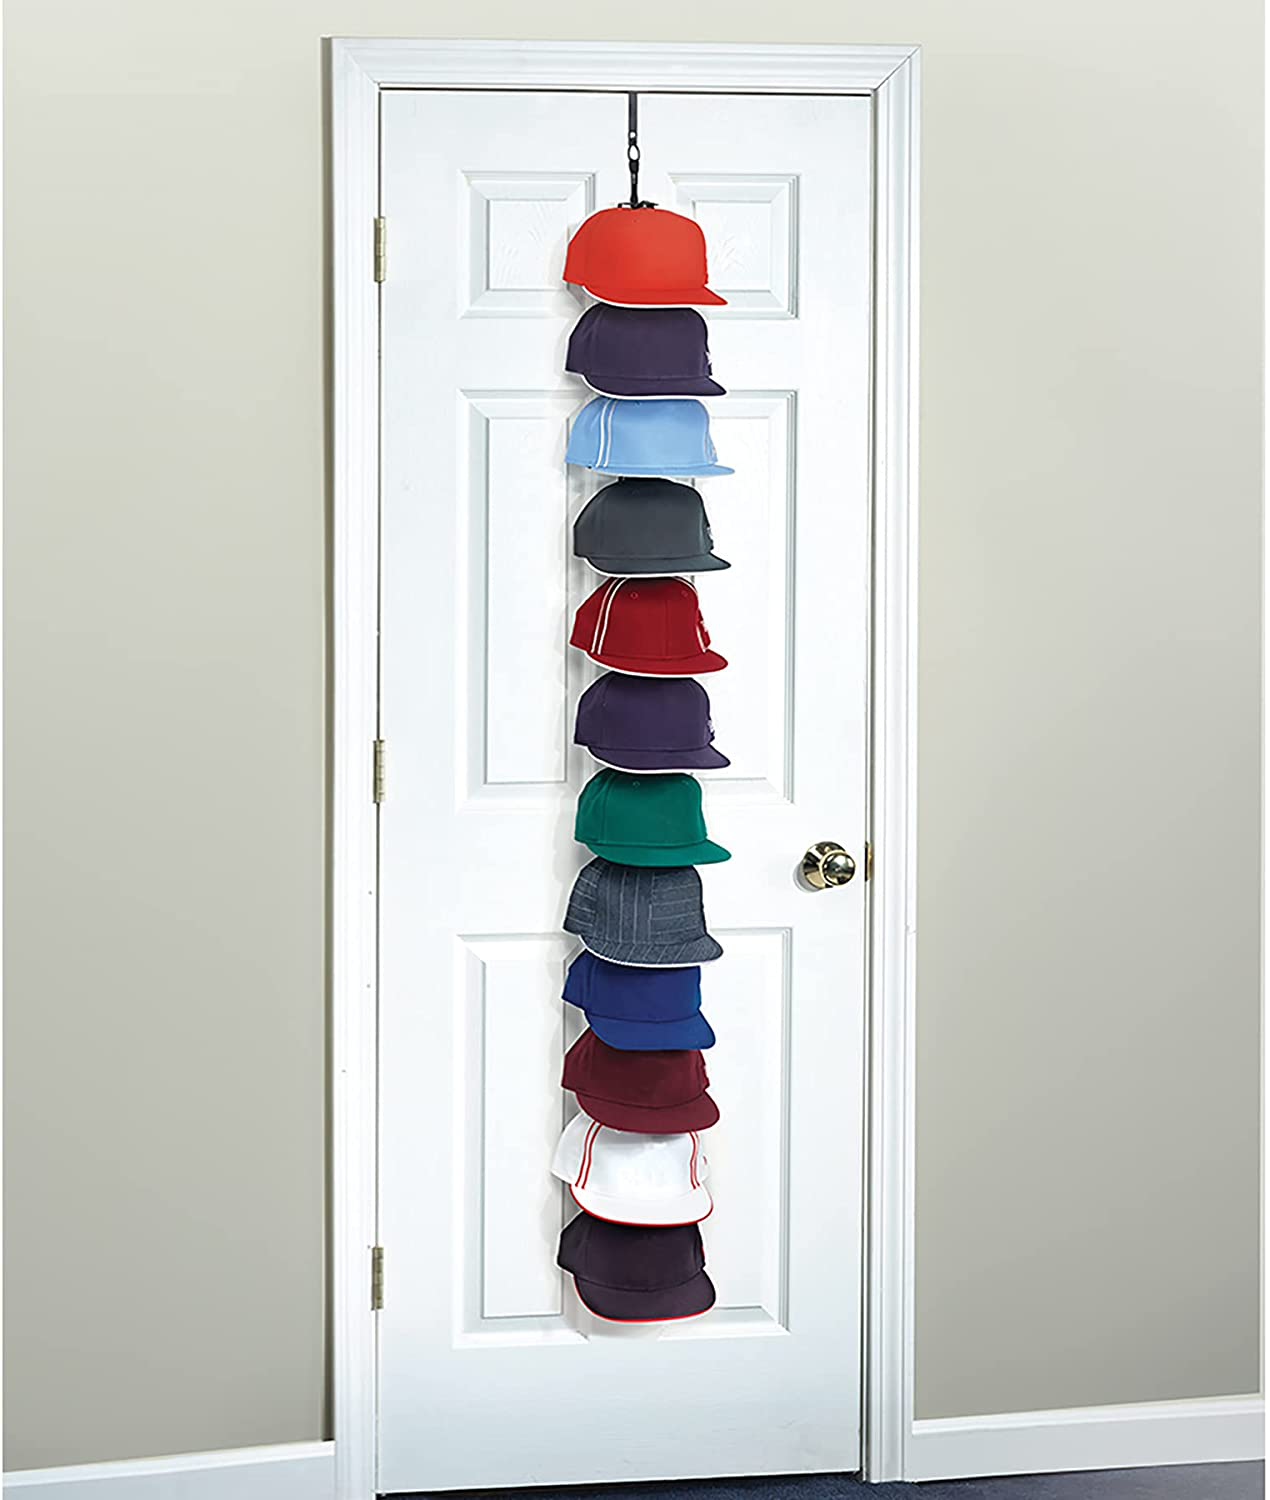 Perfect Curve Cap Rack System 36 – Baseball Cap Organizer (12 clips hold up to 36 caps,Black)